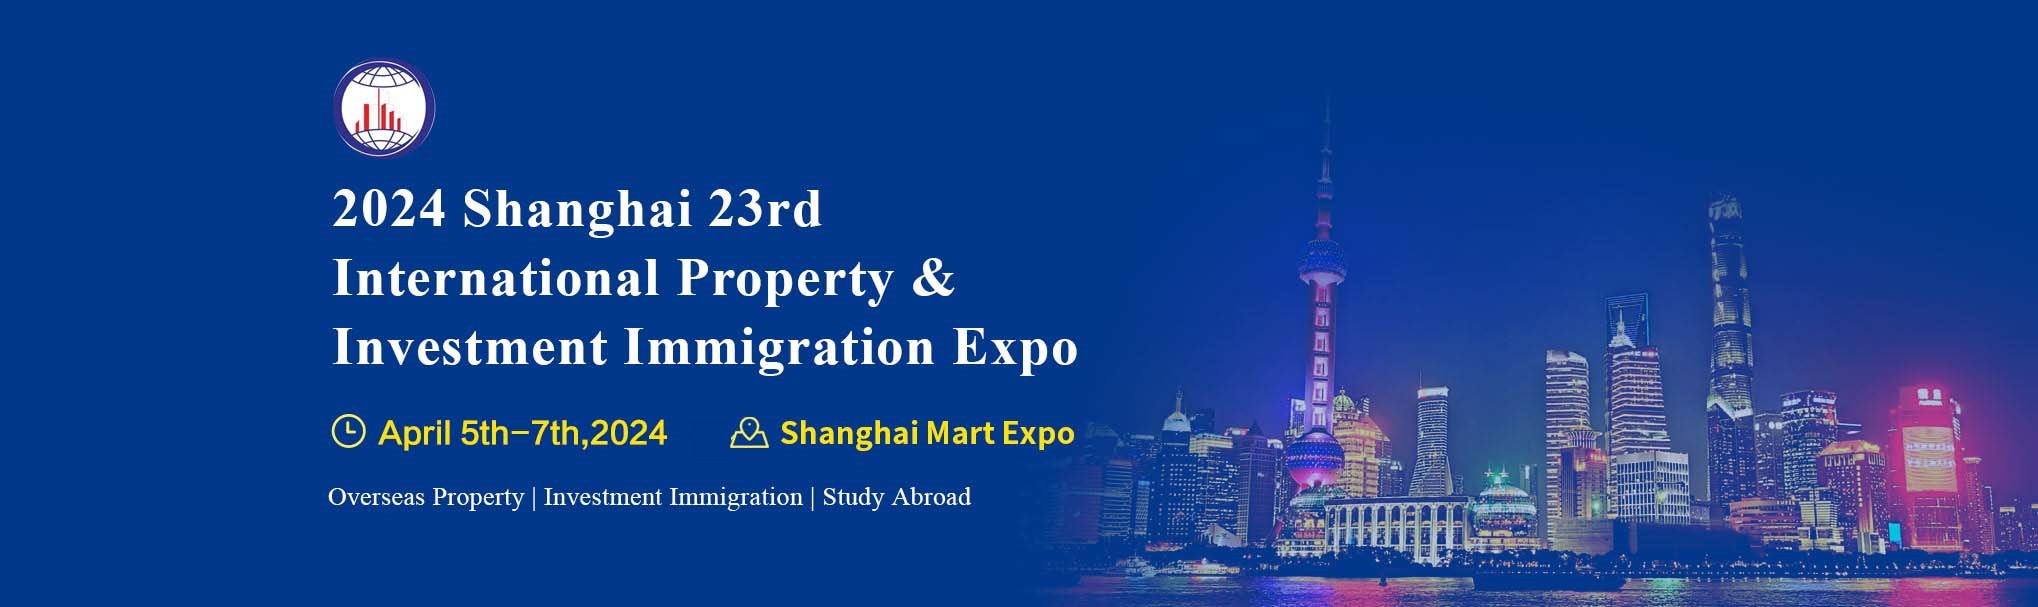 2024 Shanghai 23rd International Property & Investment Immigration Expo